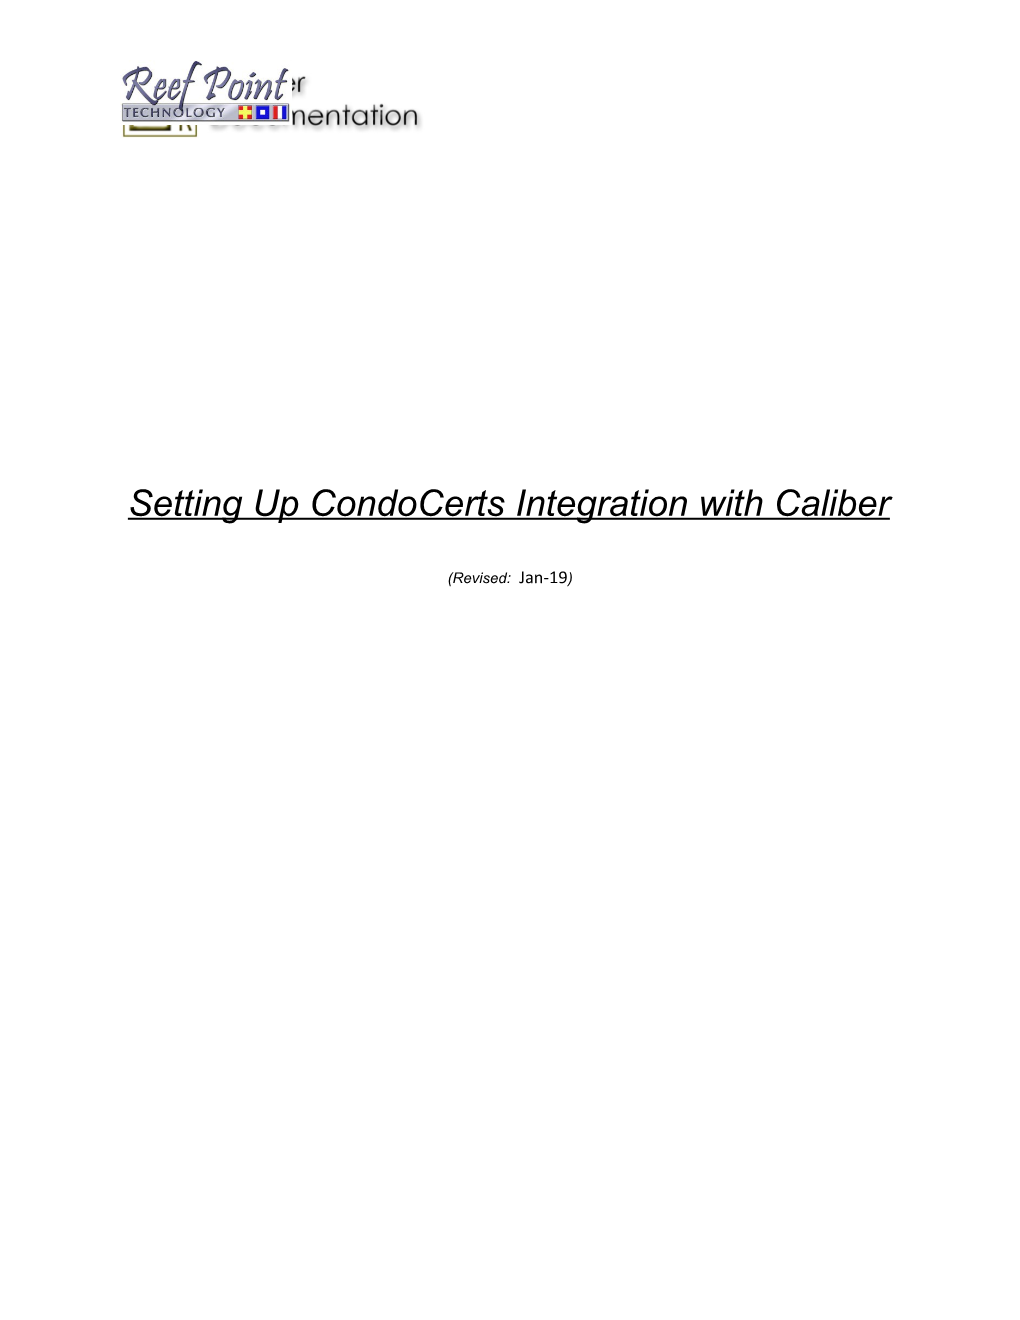 Setting up Condocerts Integration with Caliber